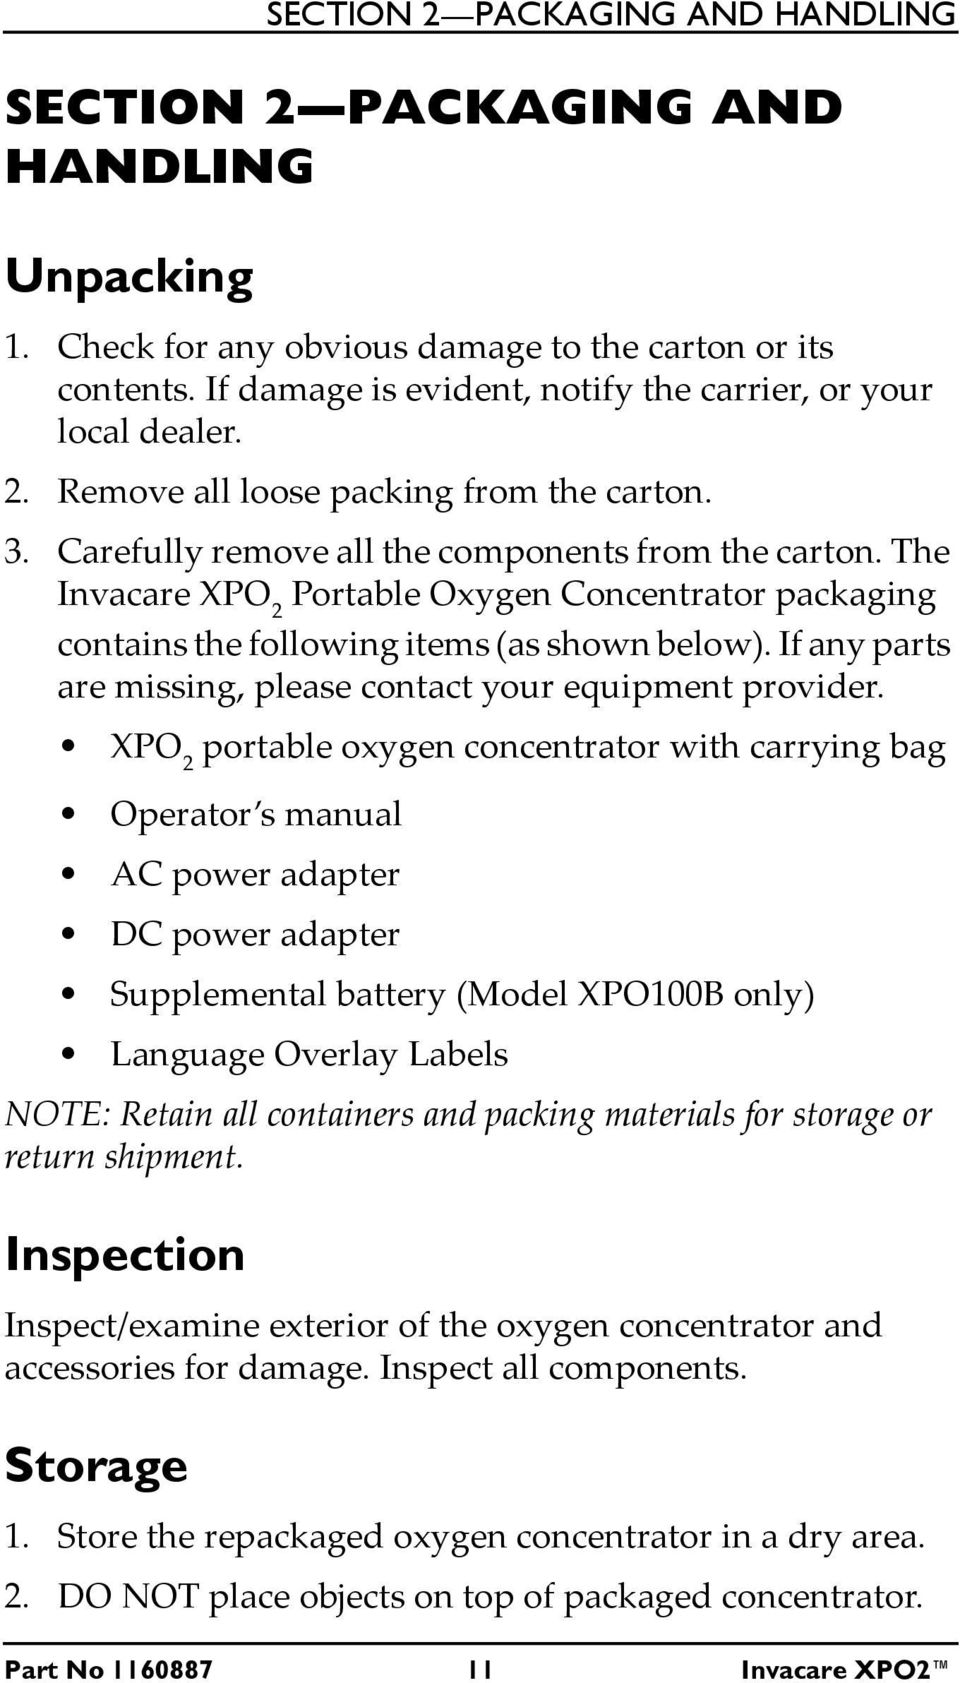 The Invacare XPO 2 Portable Oxygen Concentrator packaging contains the following items (as shown below). If any parts are missing, please contact your equipment provider.